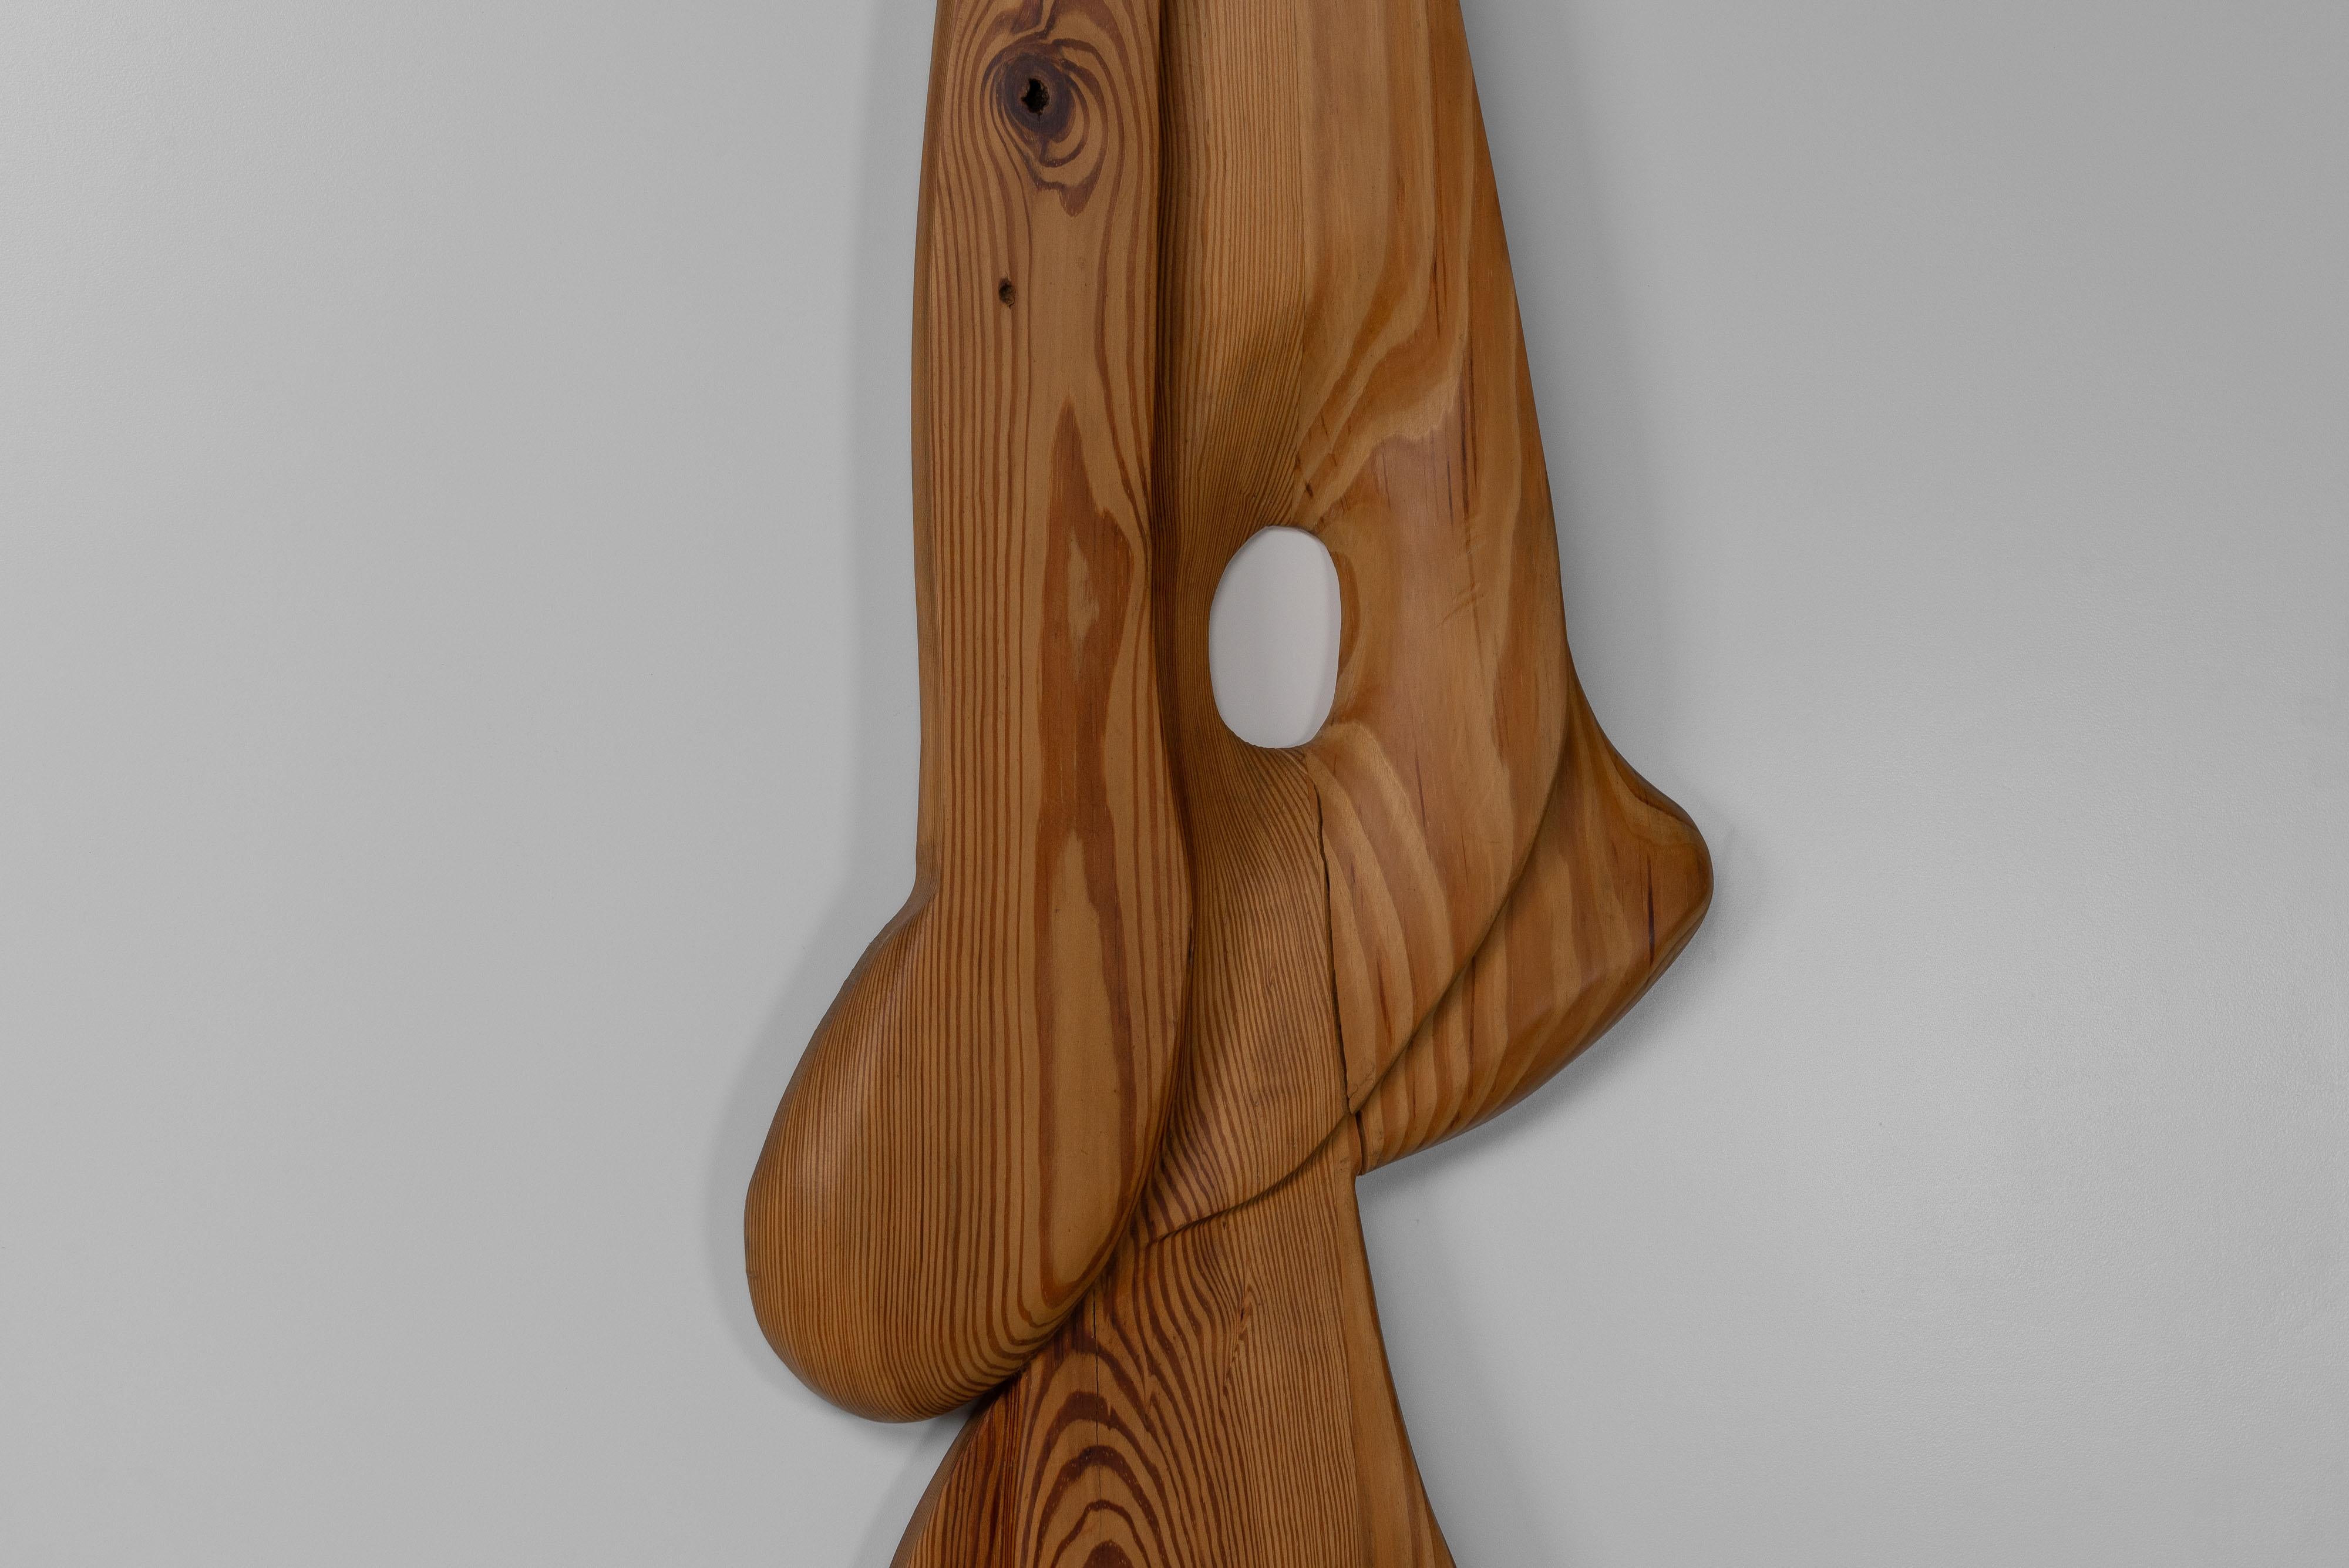 Beautiful organic shaped wall sculpture made by unknown artist in France, 1973. The stamp on the bottom says Romoh 73. The solid pine wood has a nice pattern This sculpture has a unique shape that might remind you of a figure, but feel free to let